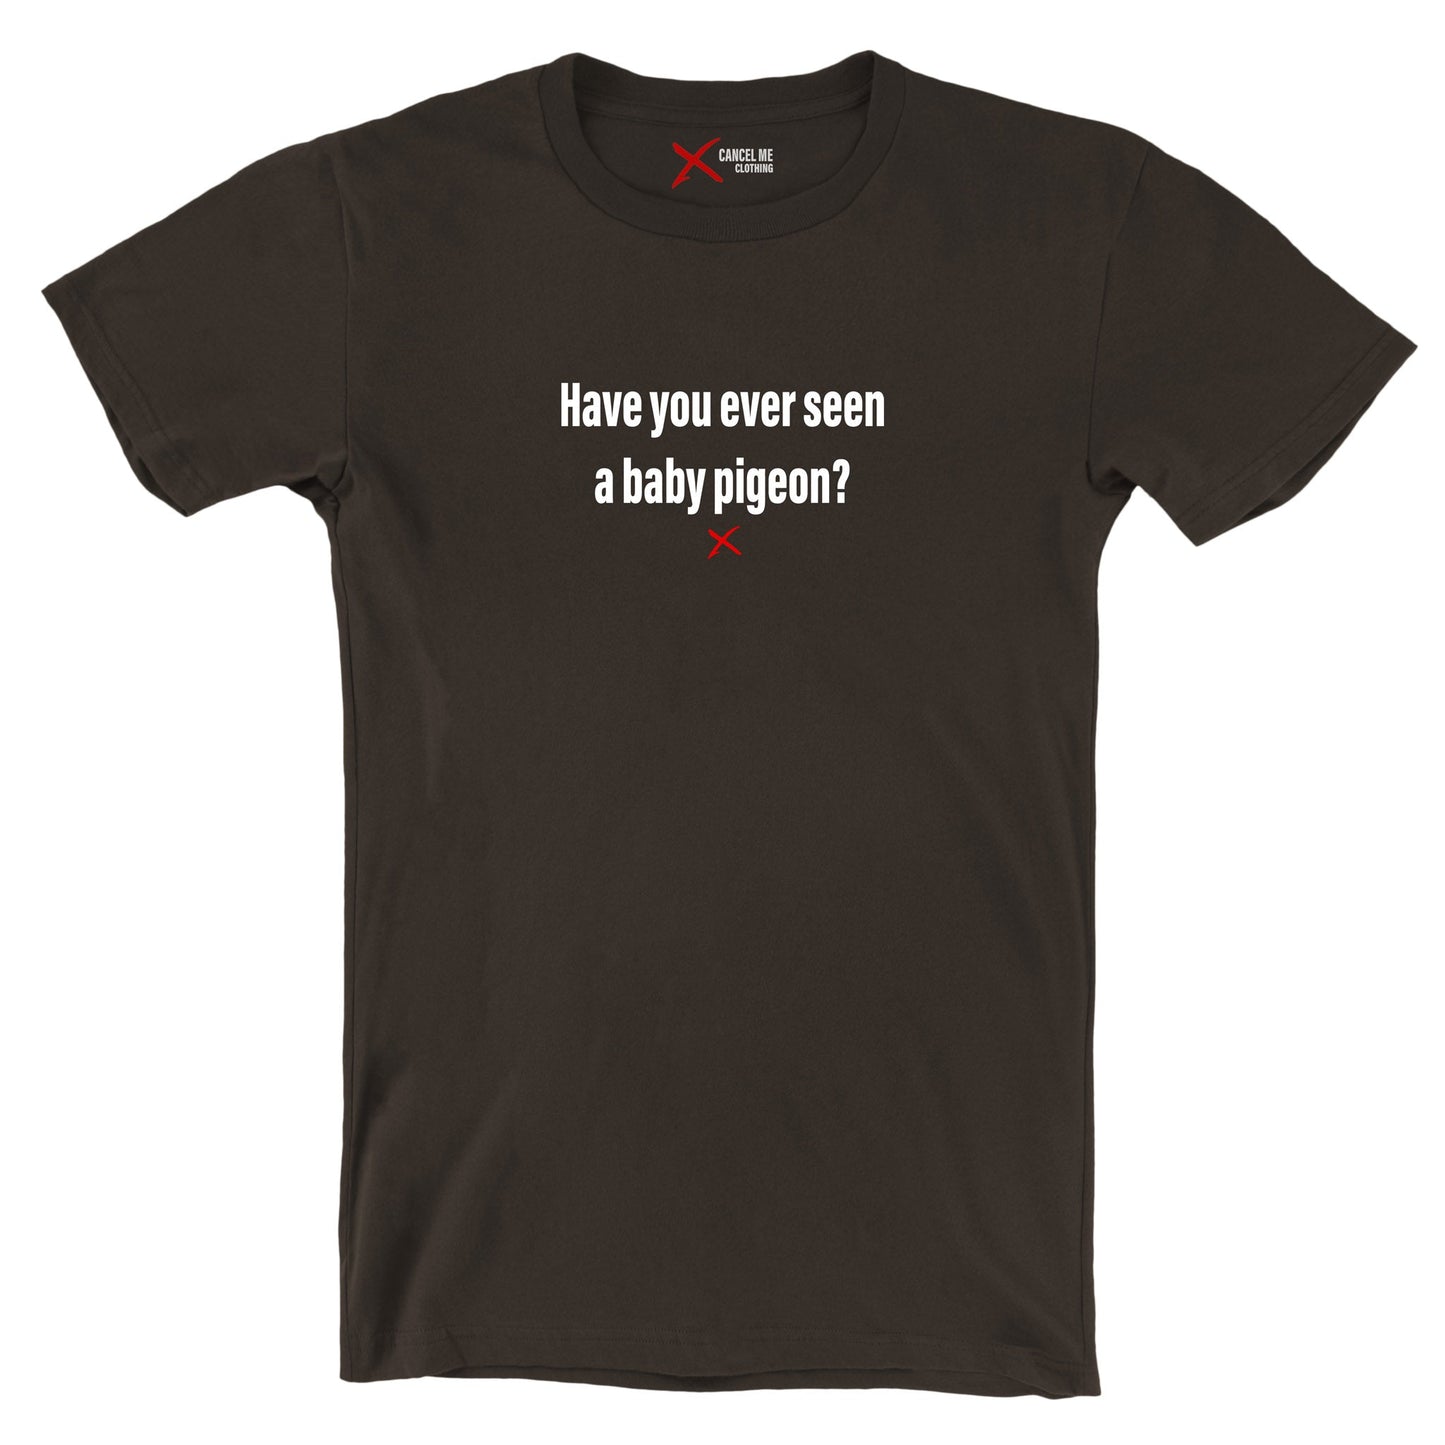 Have you ever seen a baby pigeon? - Shirt